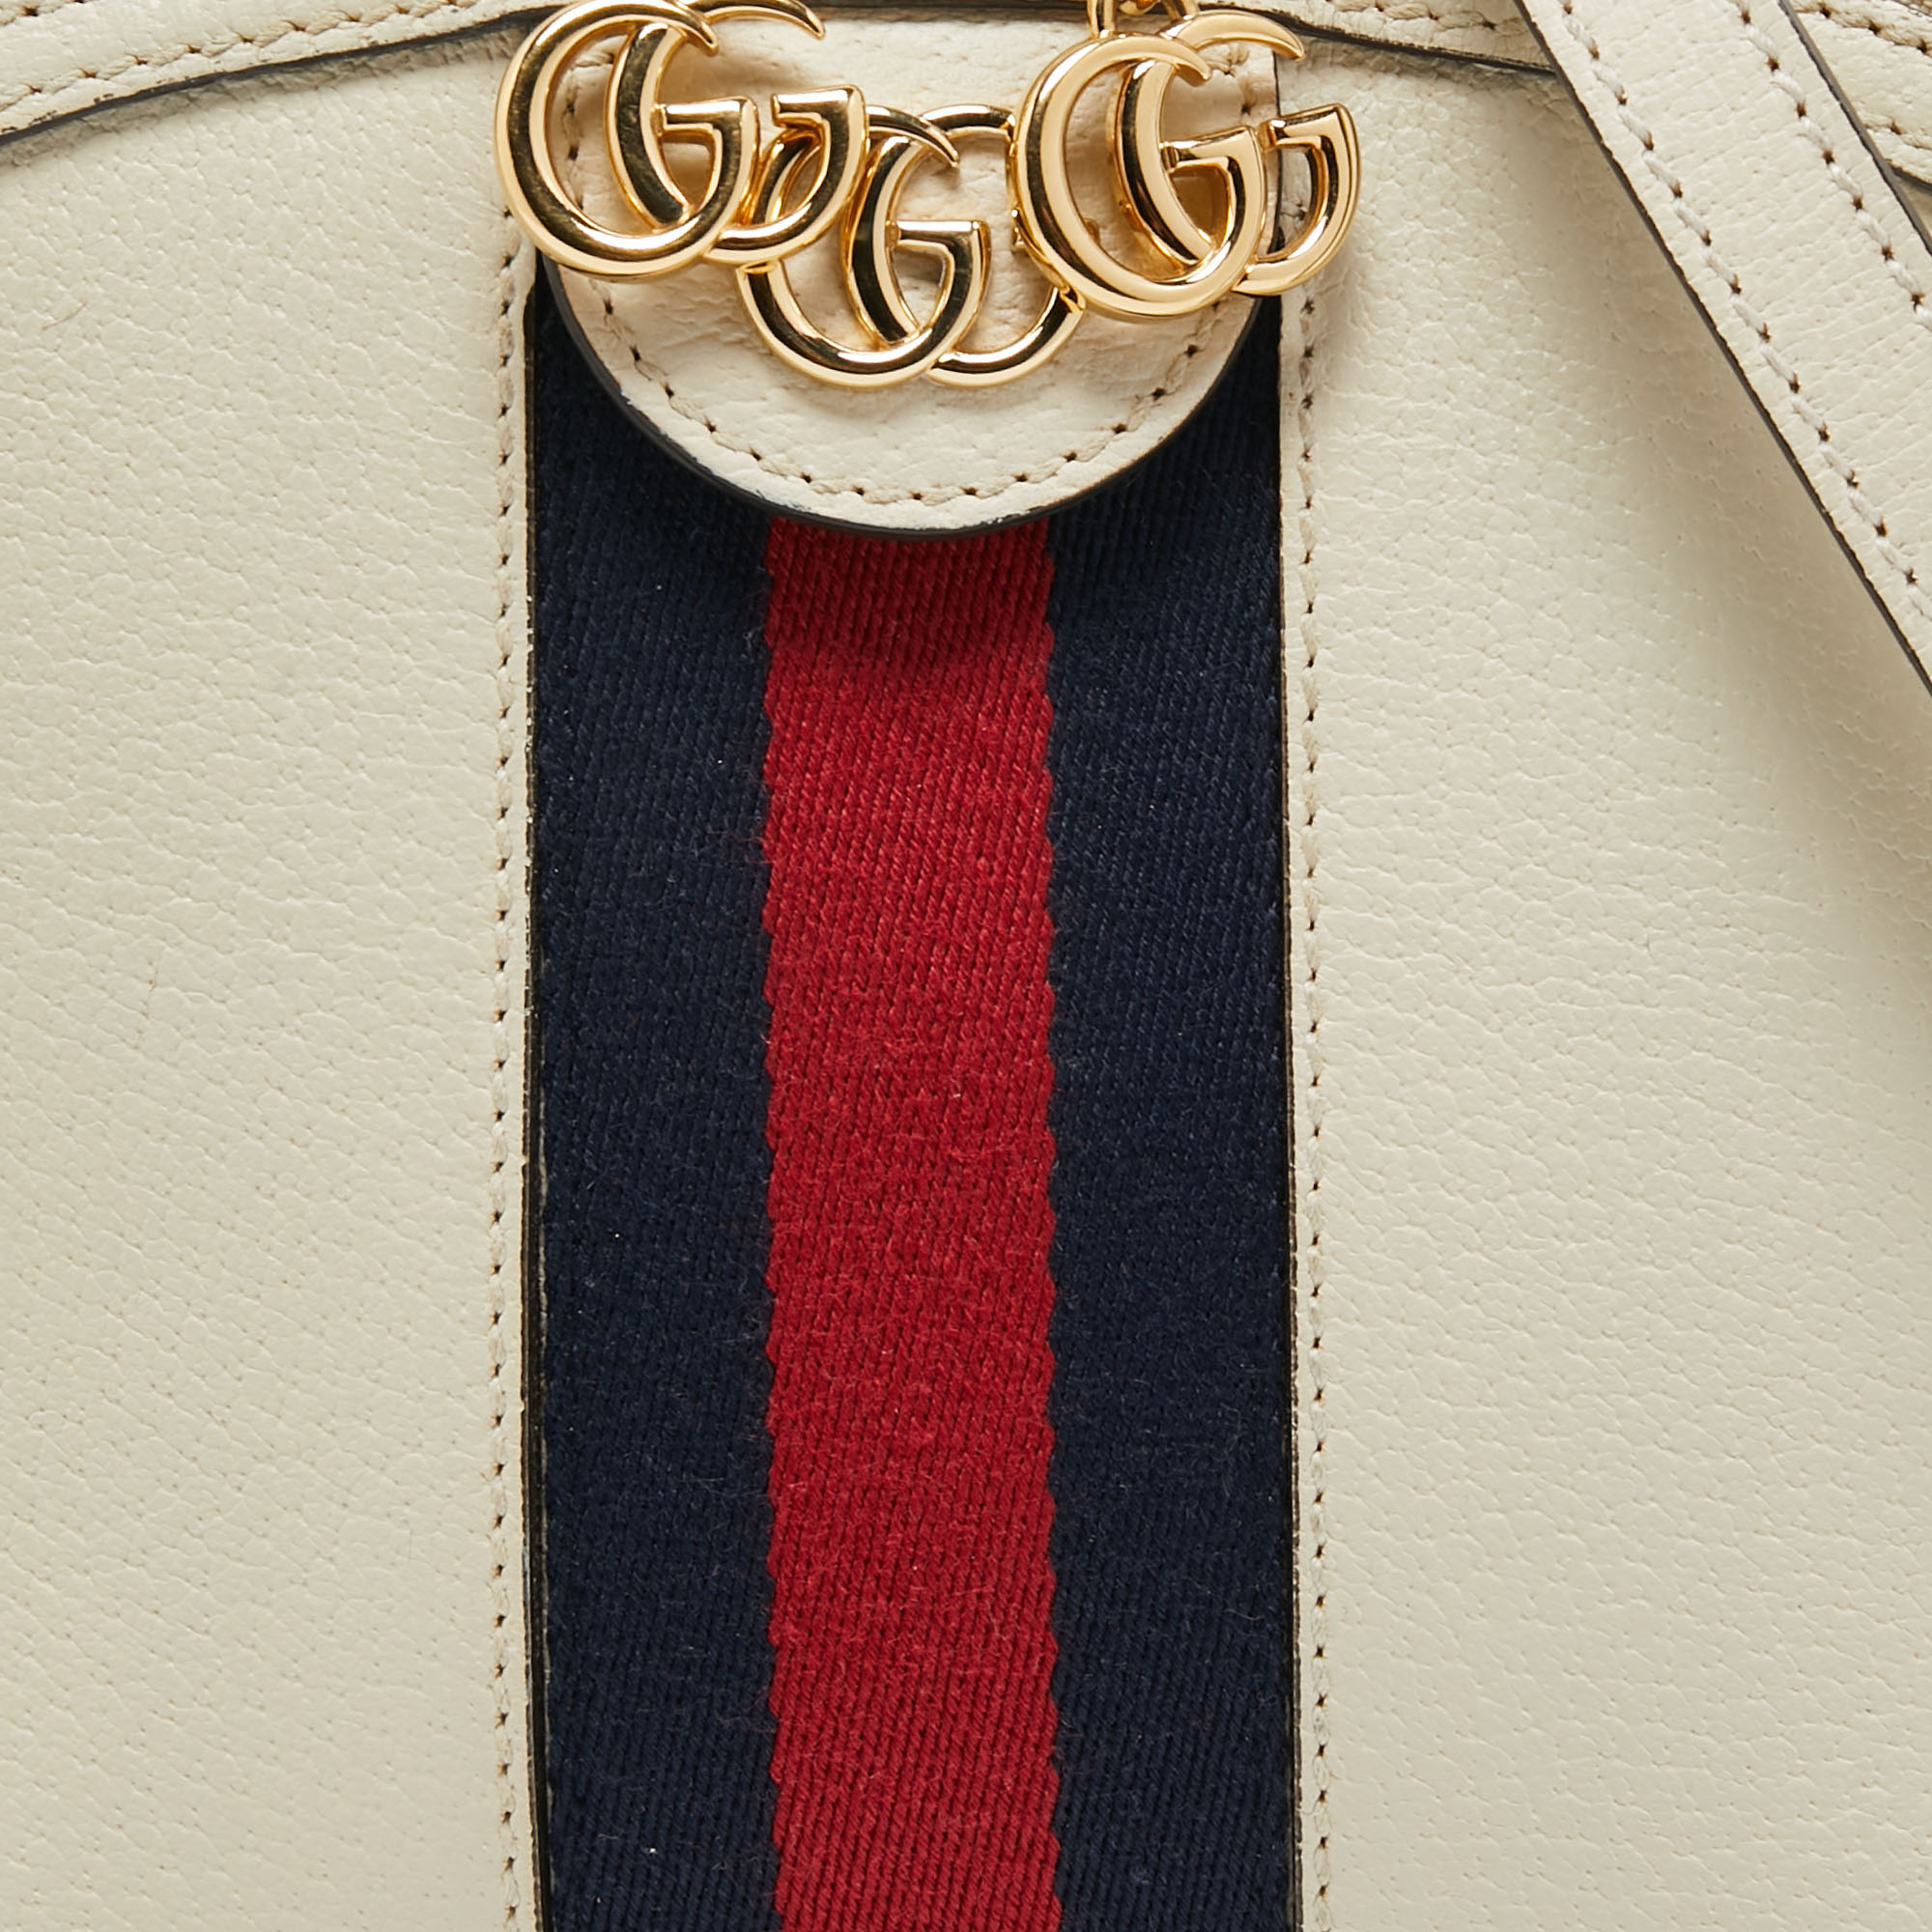 Gucci Off White Leather Small Ophidia Shoulder Bag